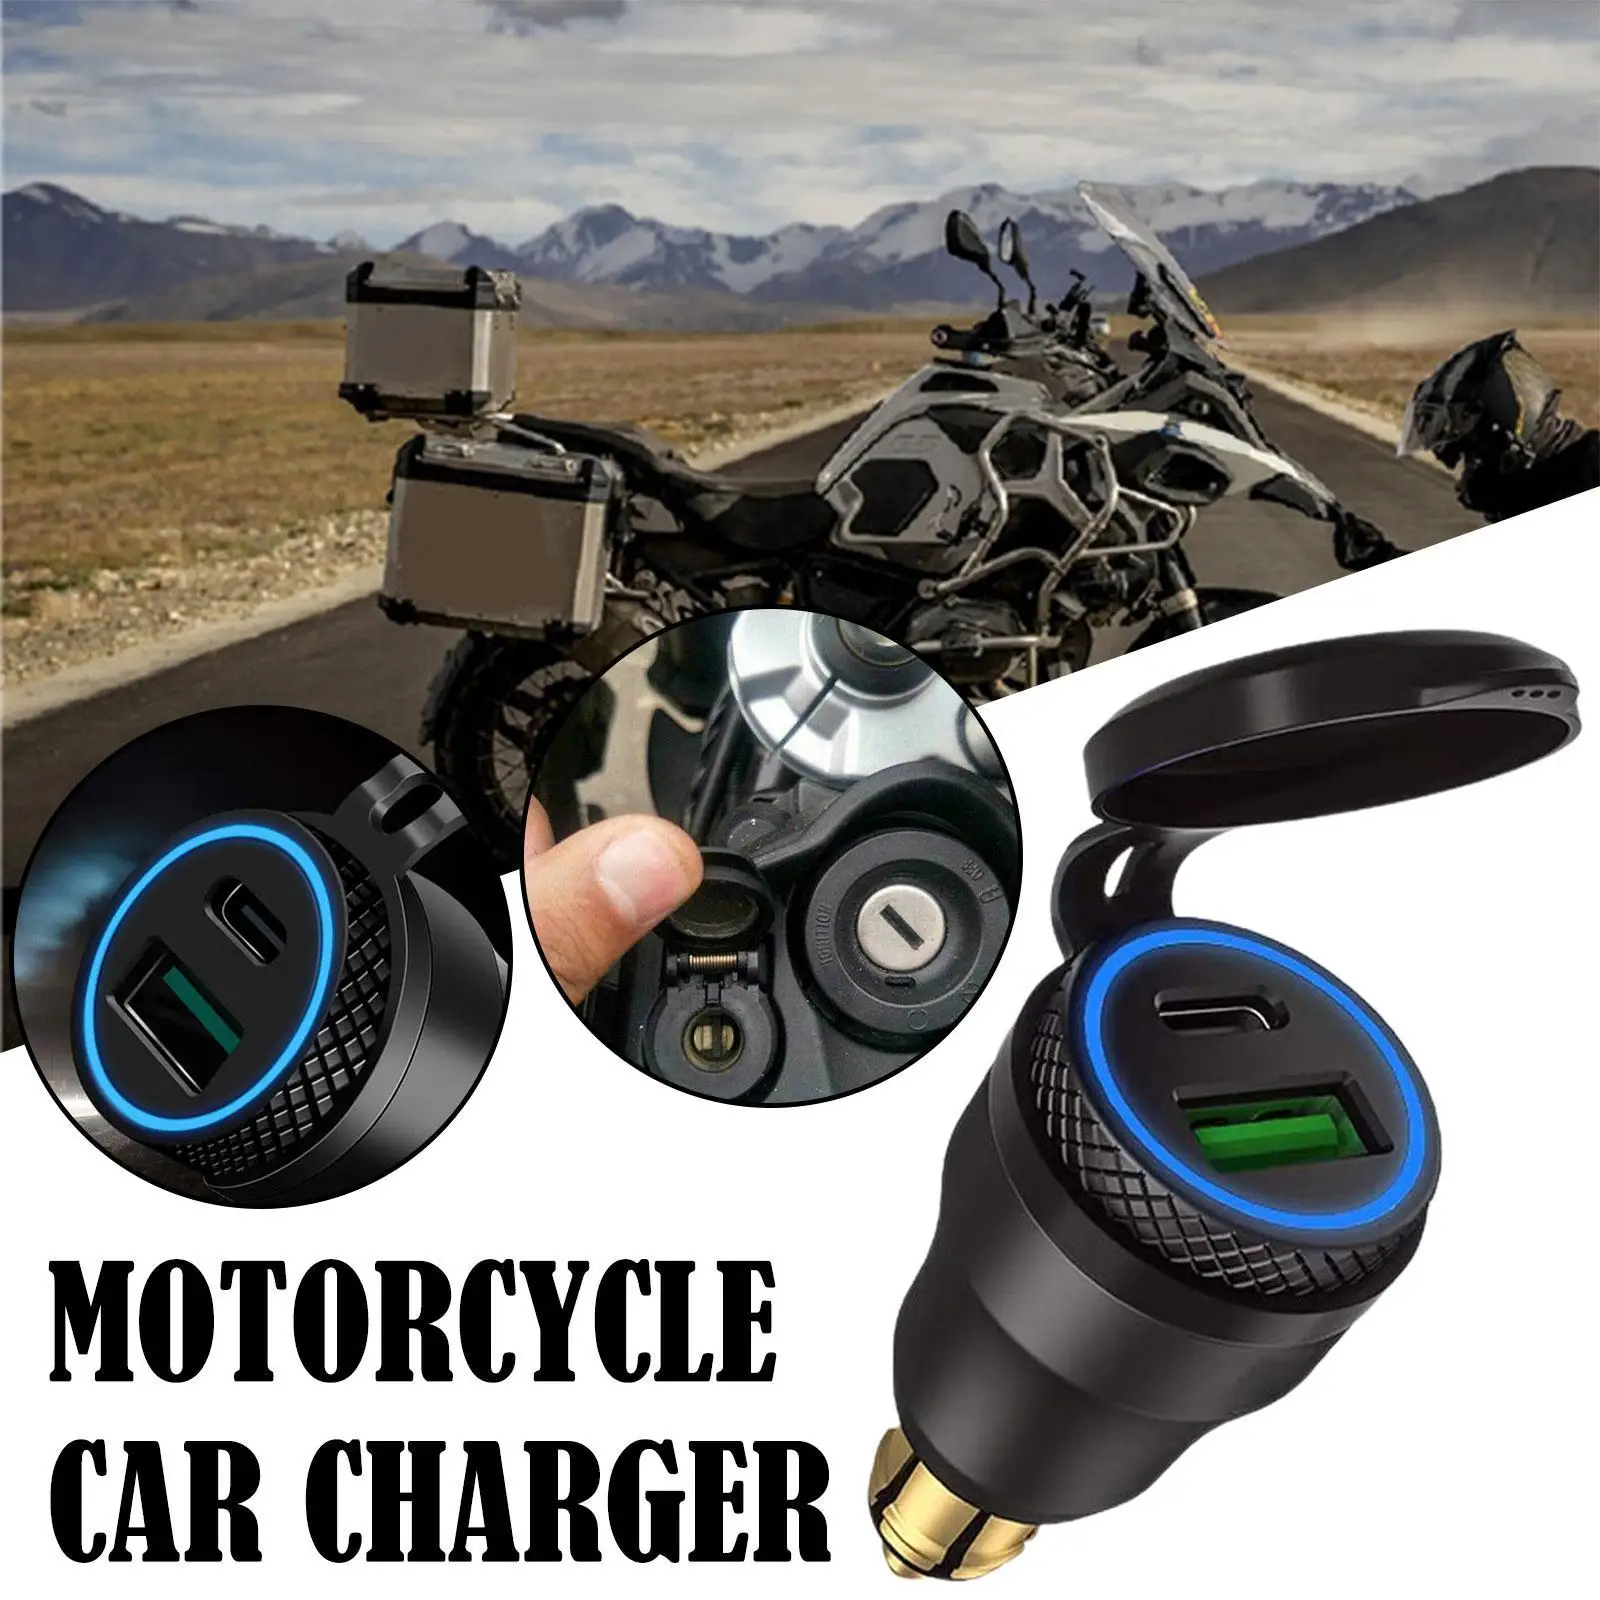 

12V/24V Motorcycle Car Dual QC3.0 USB Type C PD Fast For BMW F800GS F650GS F700GS Motorcycles Style Power Socket For Hella / DIN